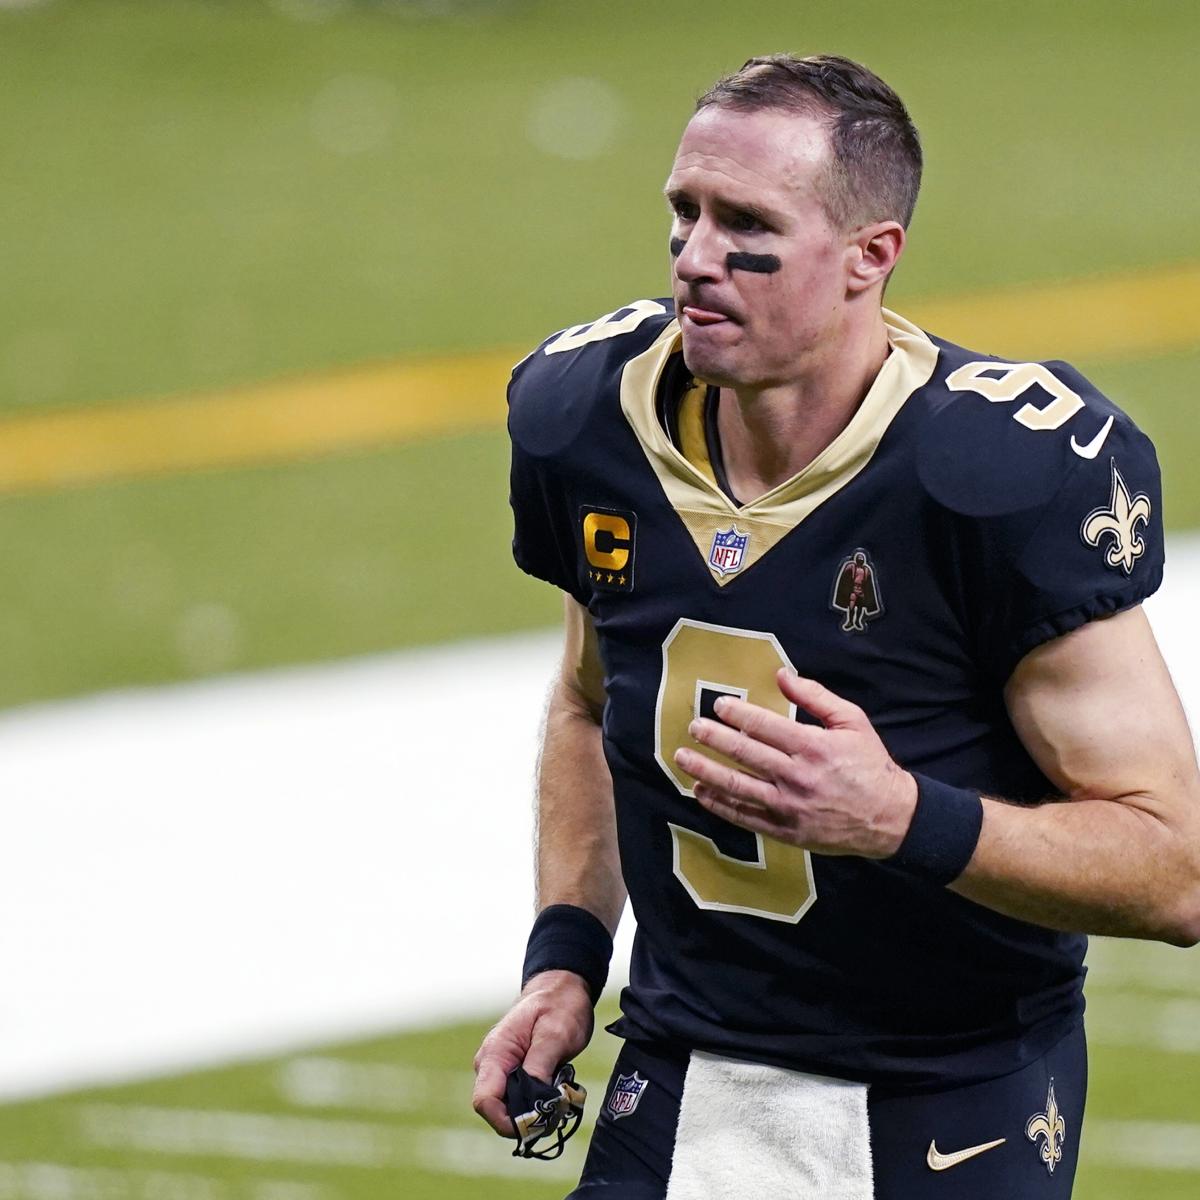 Saints' Drew Brees Says He's Not 100 Percent Healthy After Rib, Lung